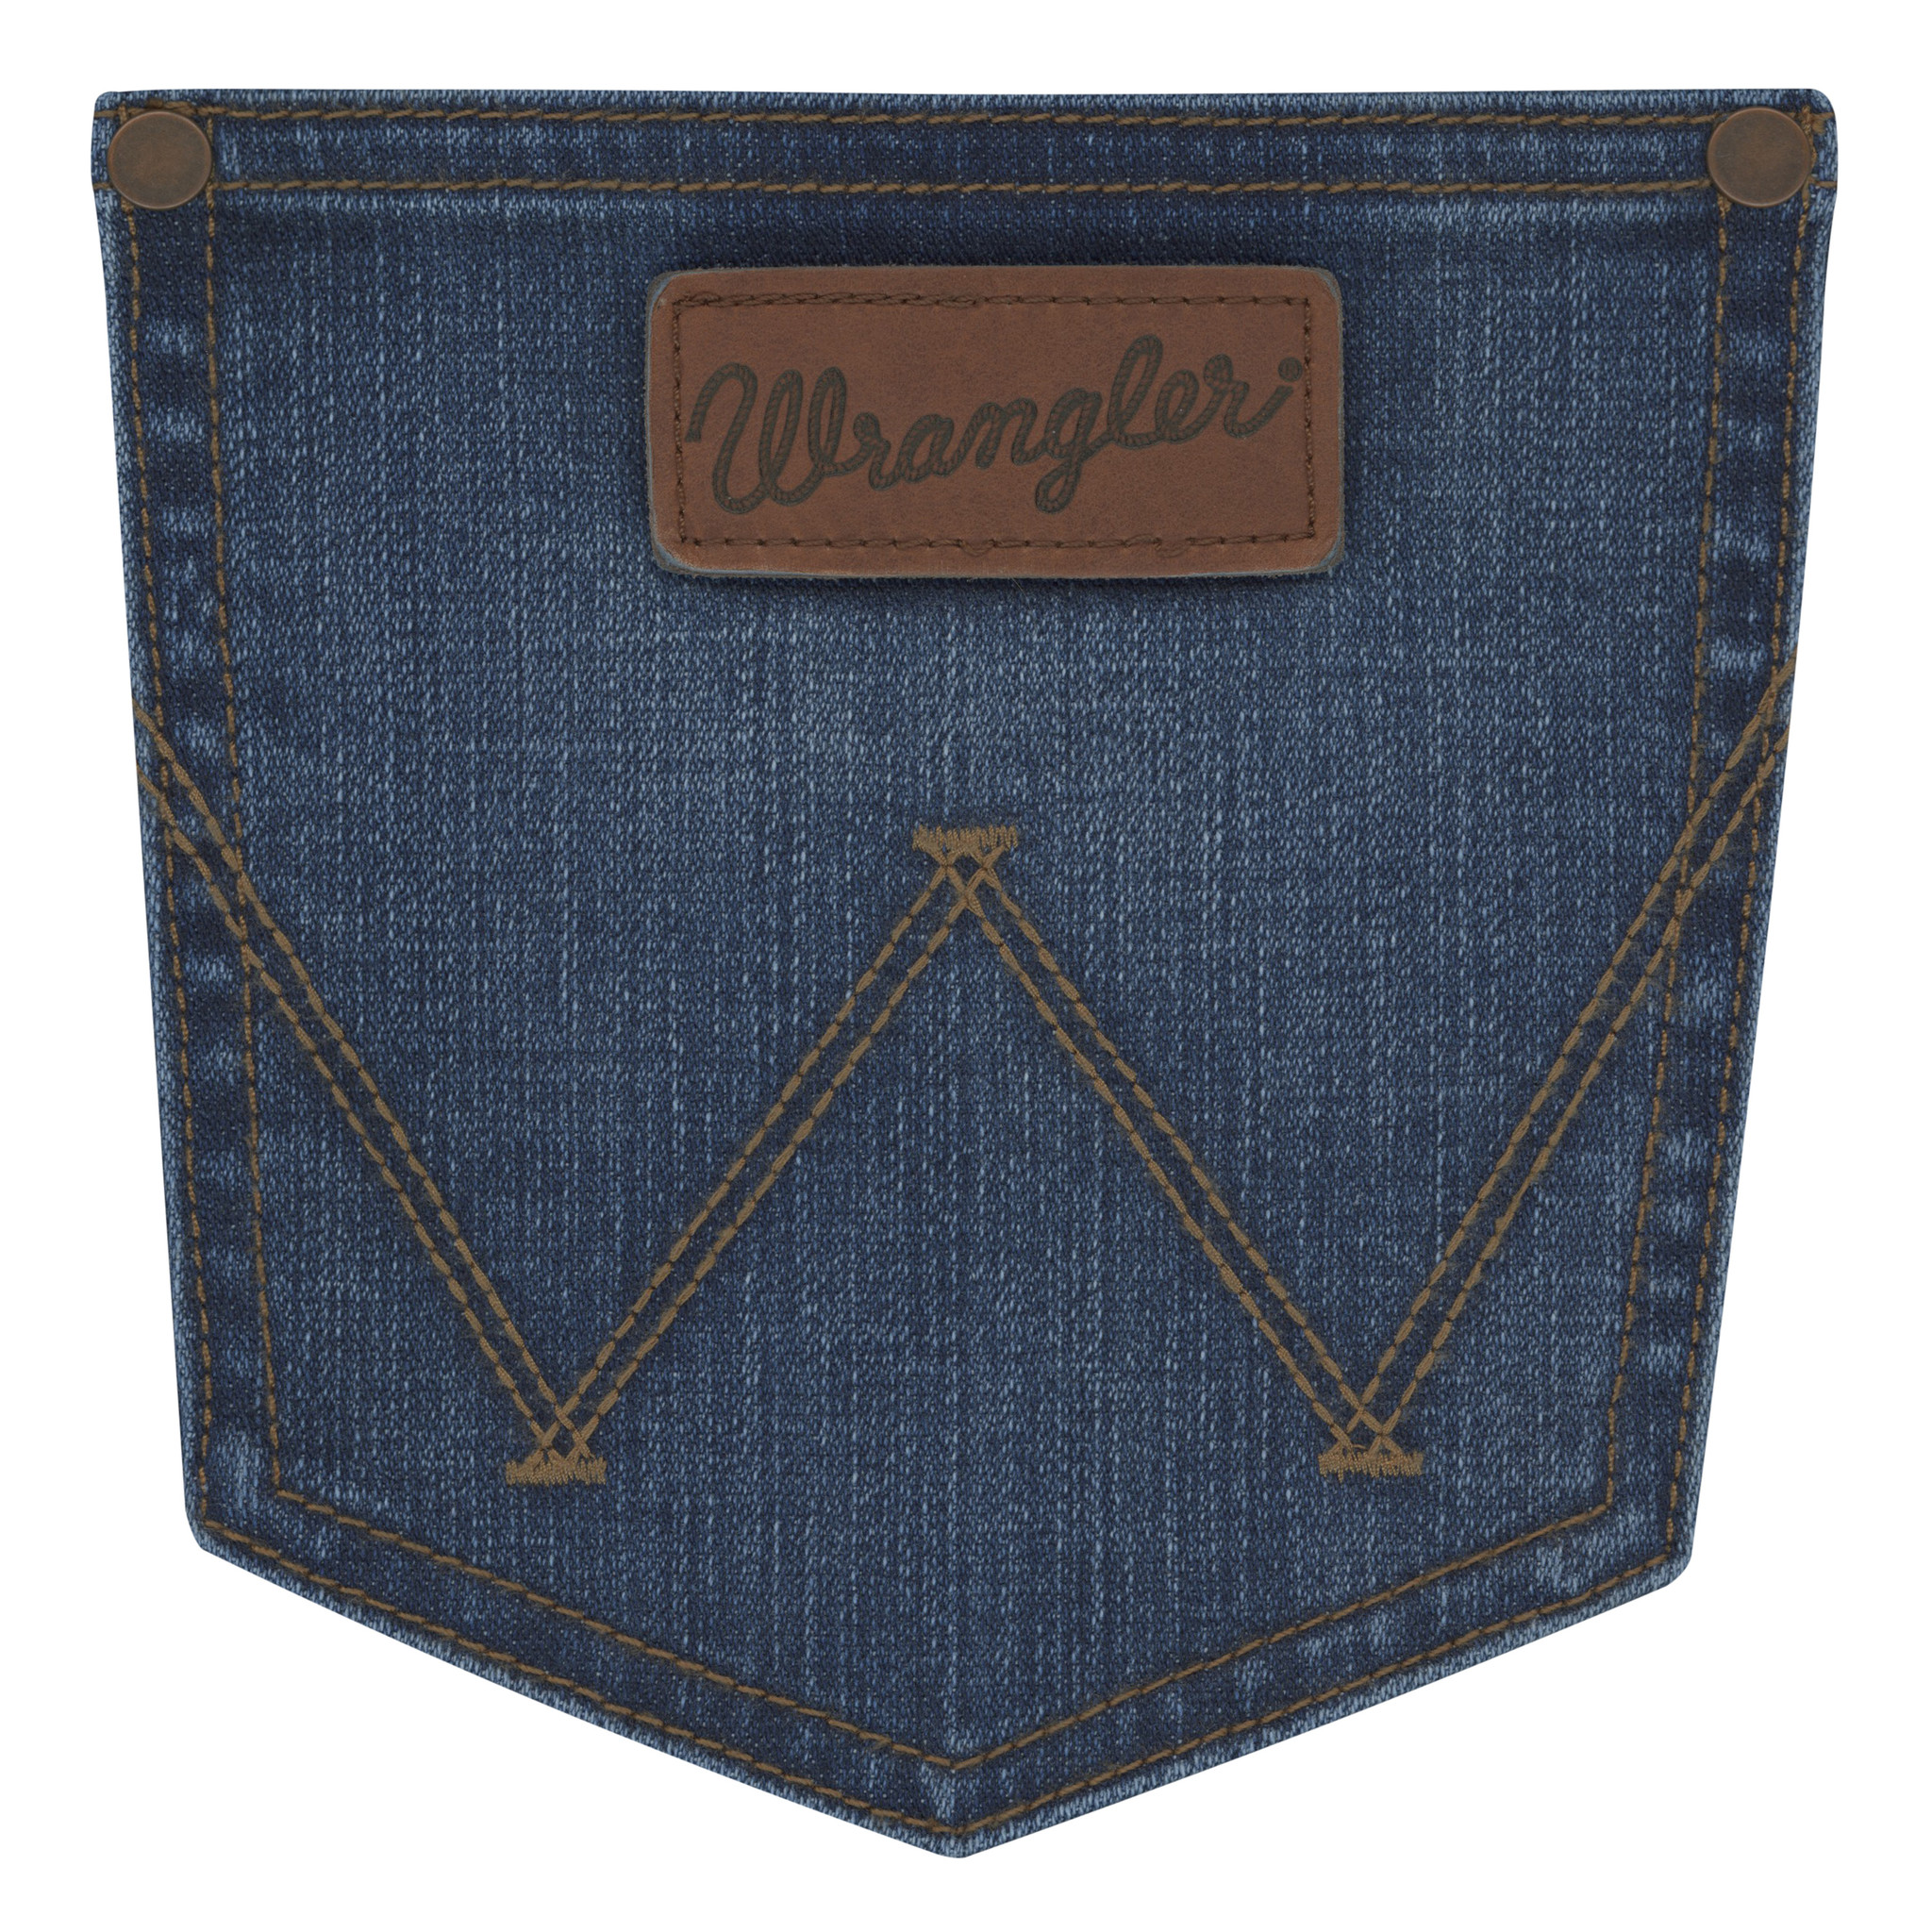 Wrangler Retro Slim Fit Straight Leg Jeans | Red River - Frontier Western  Shop